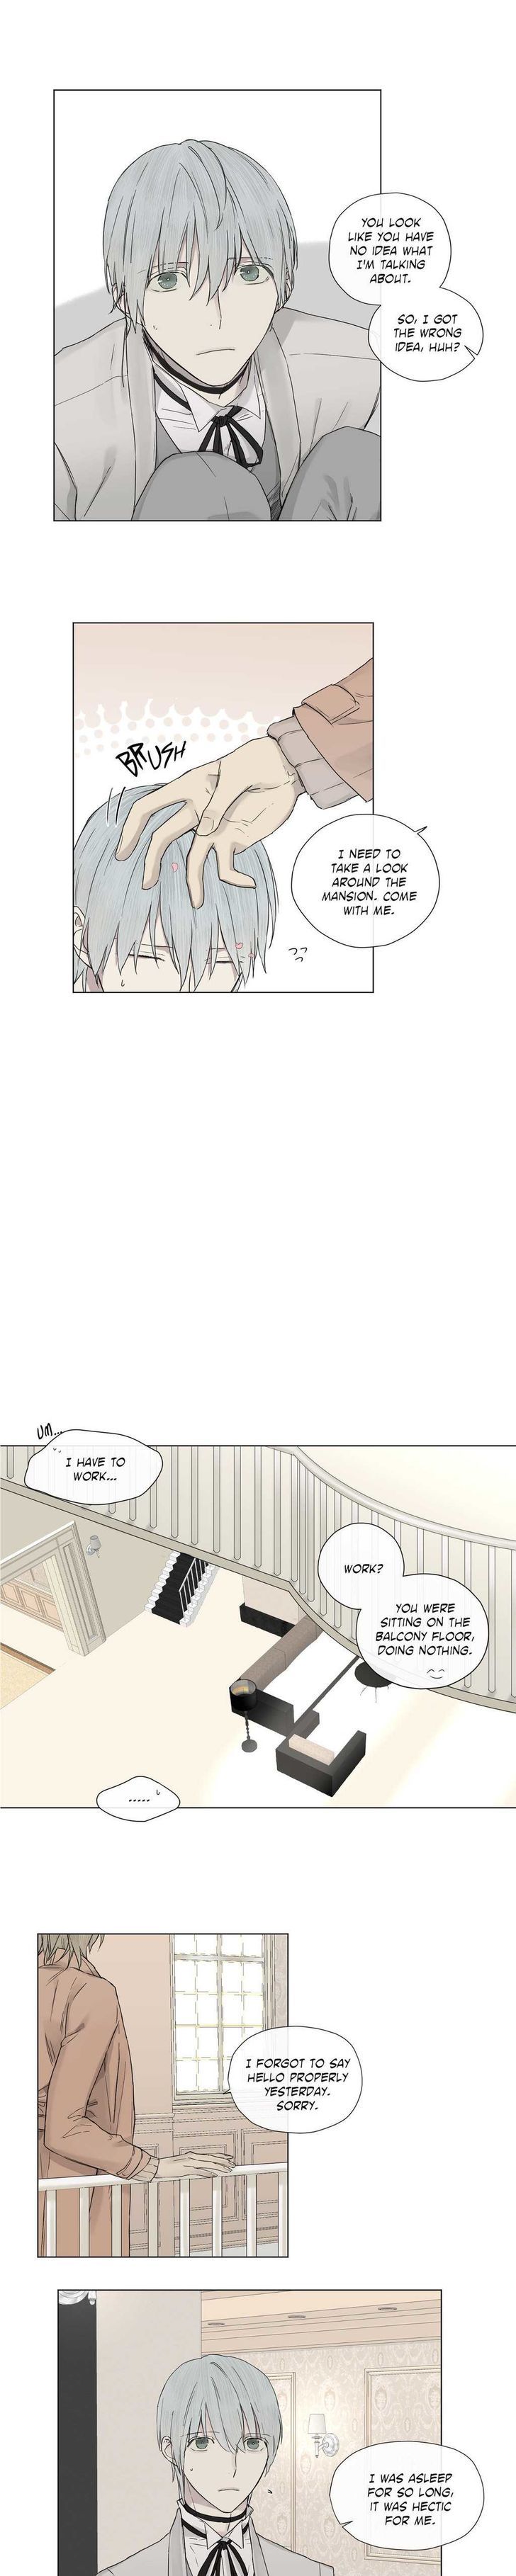 Royal Servant - Chapter 13 Page 3